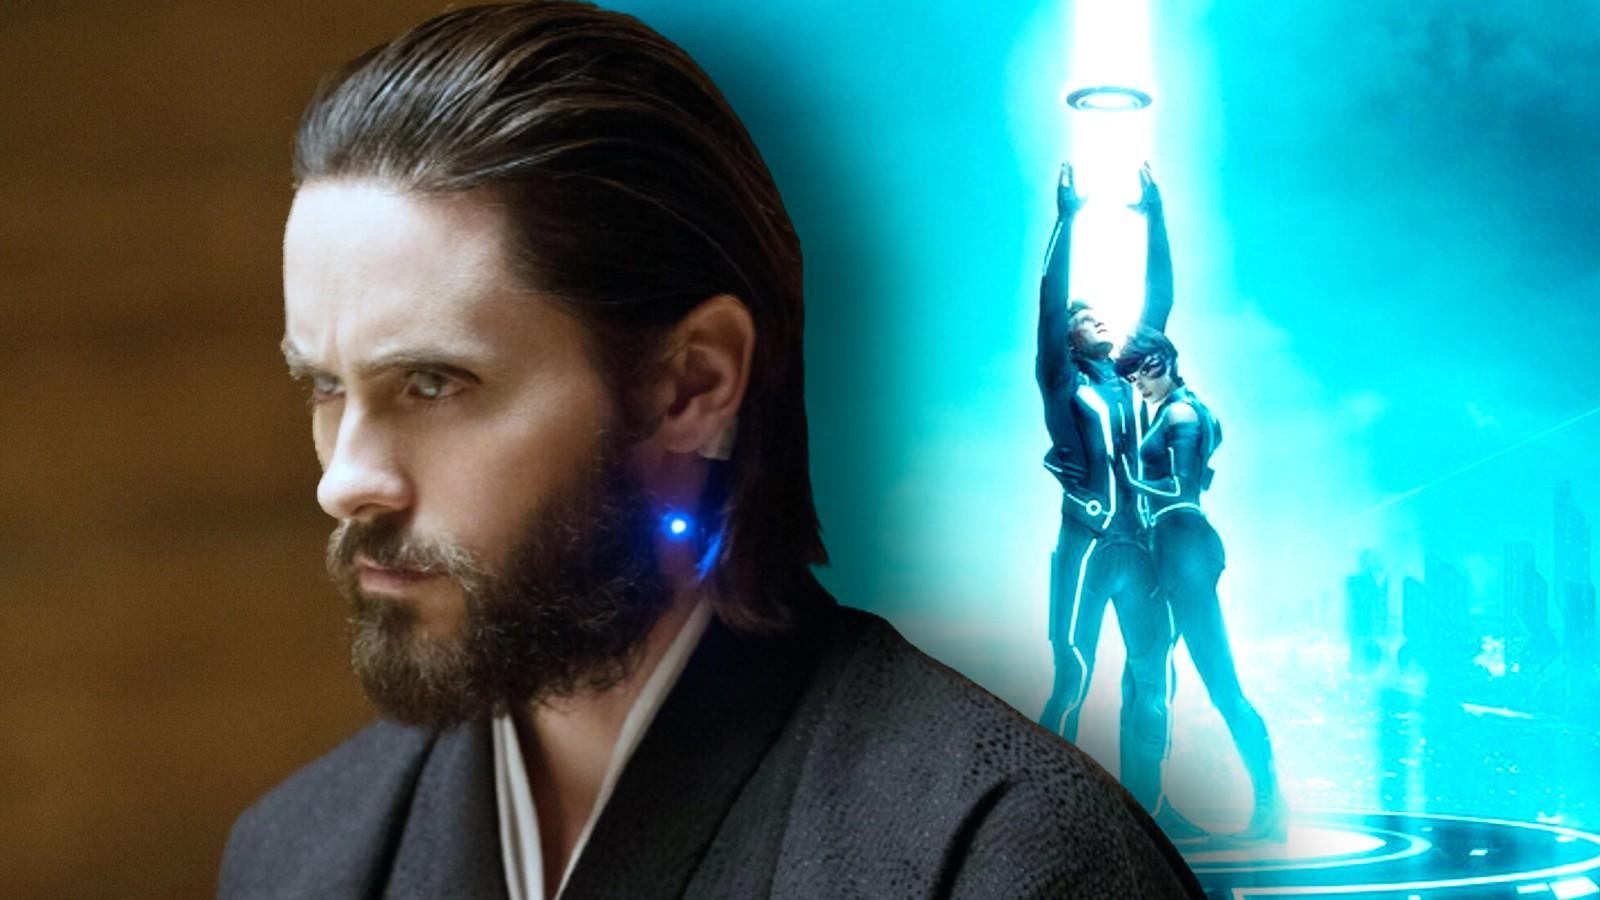 Jared Leto and a scene from Tron: Legacy